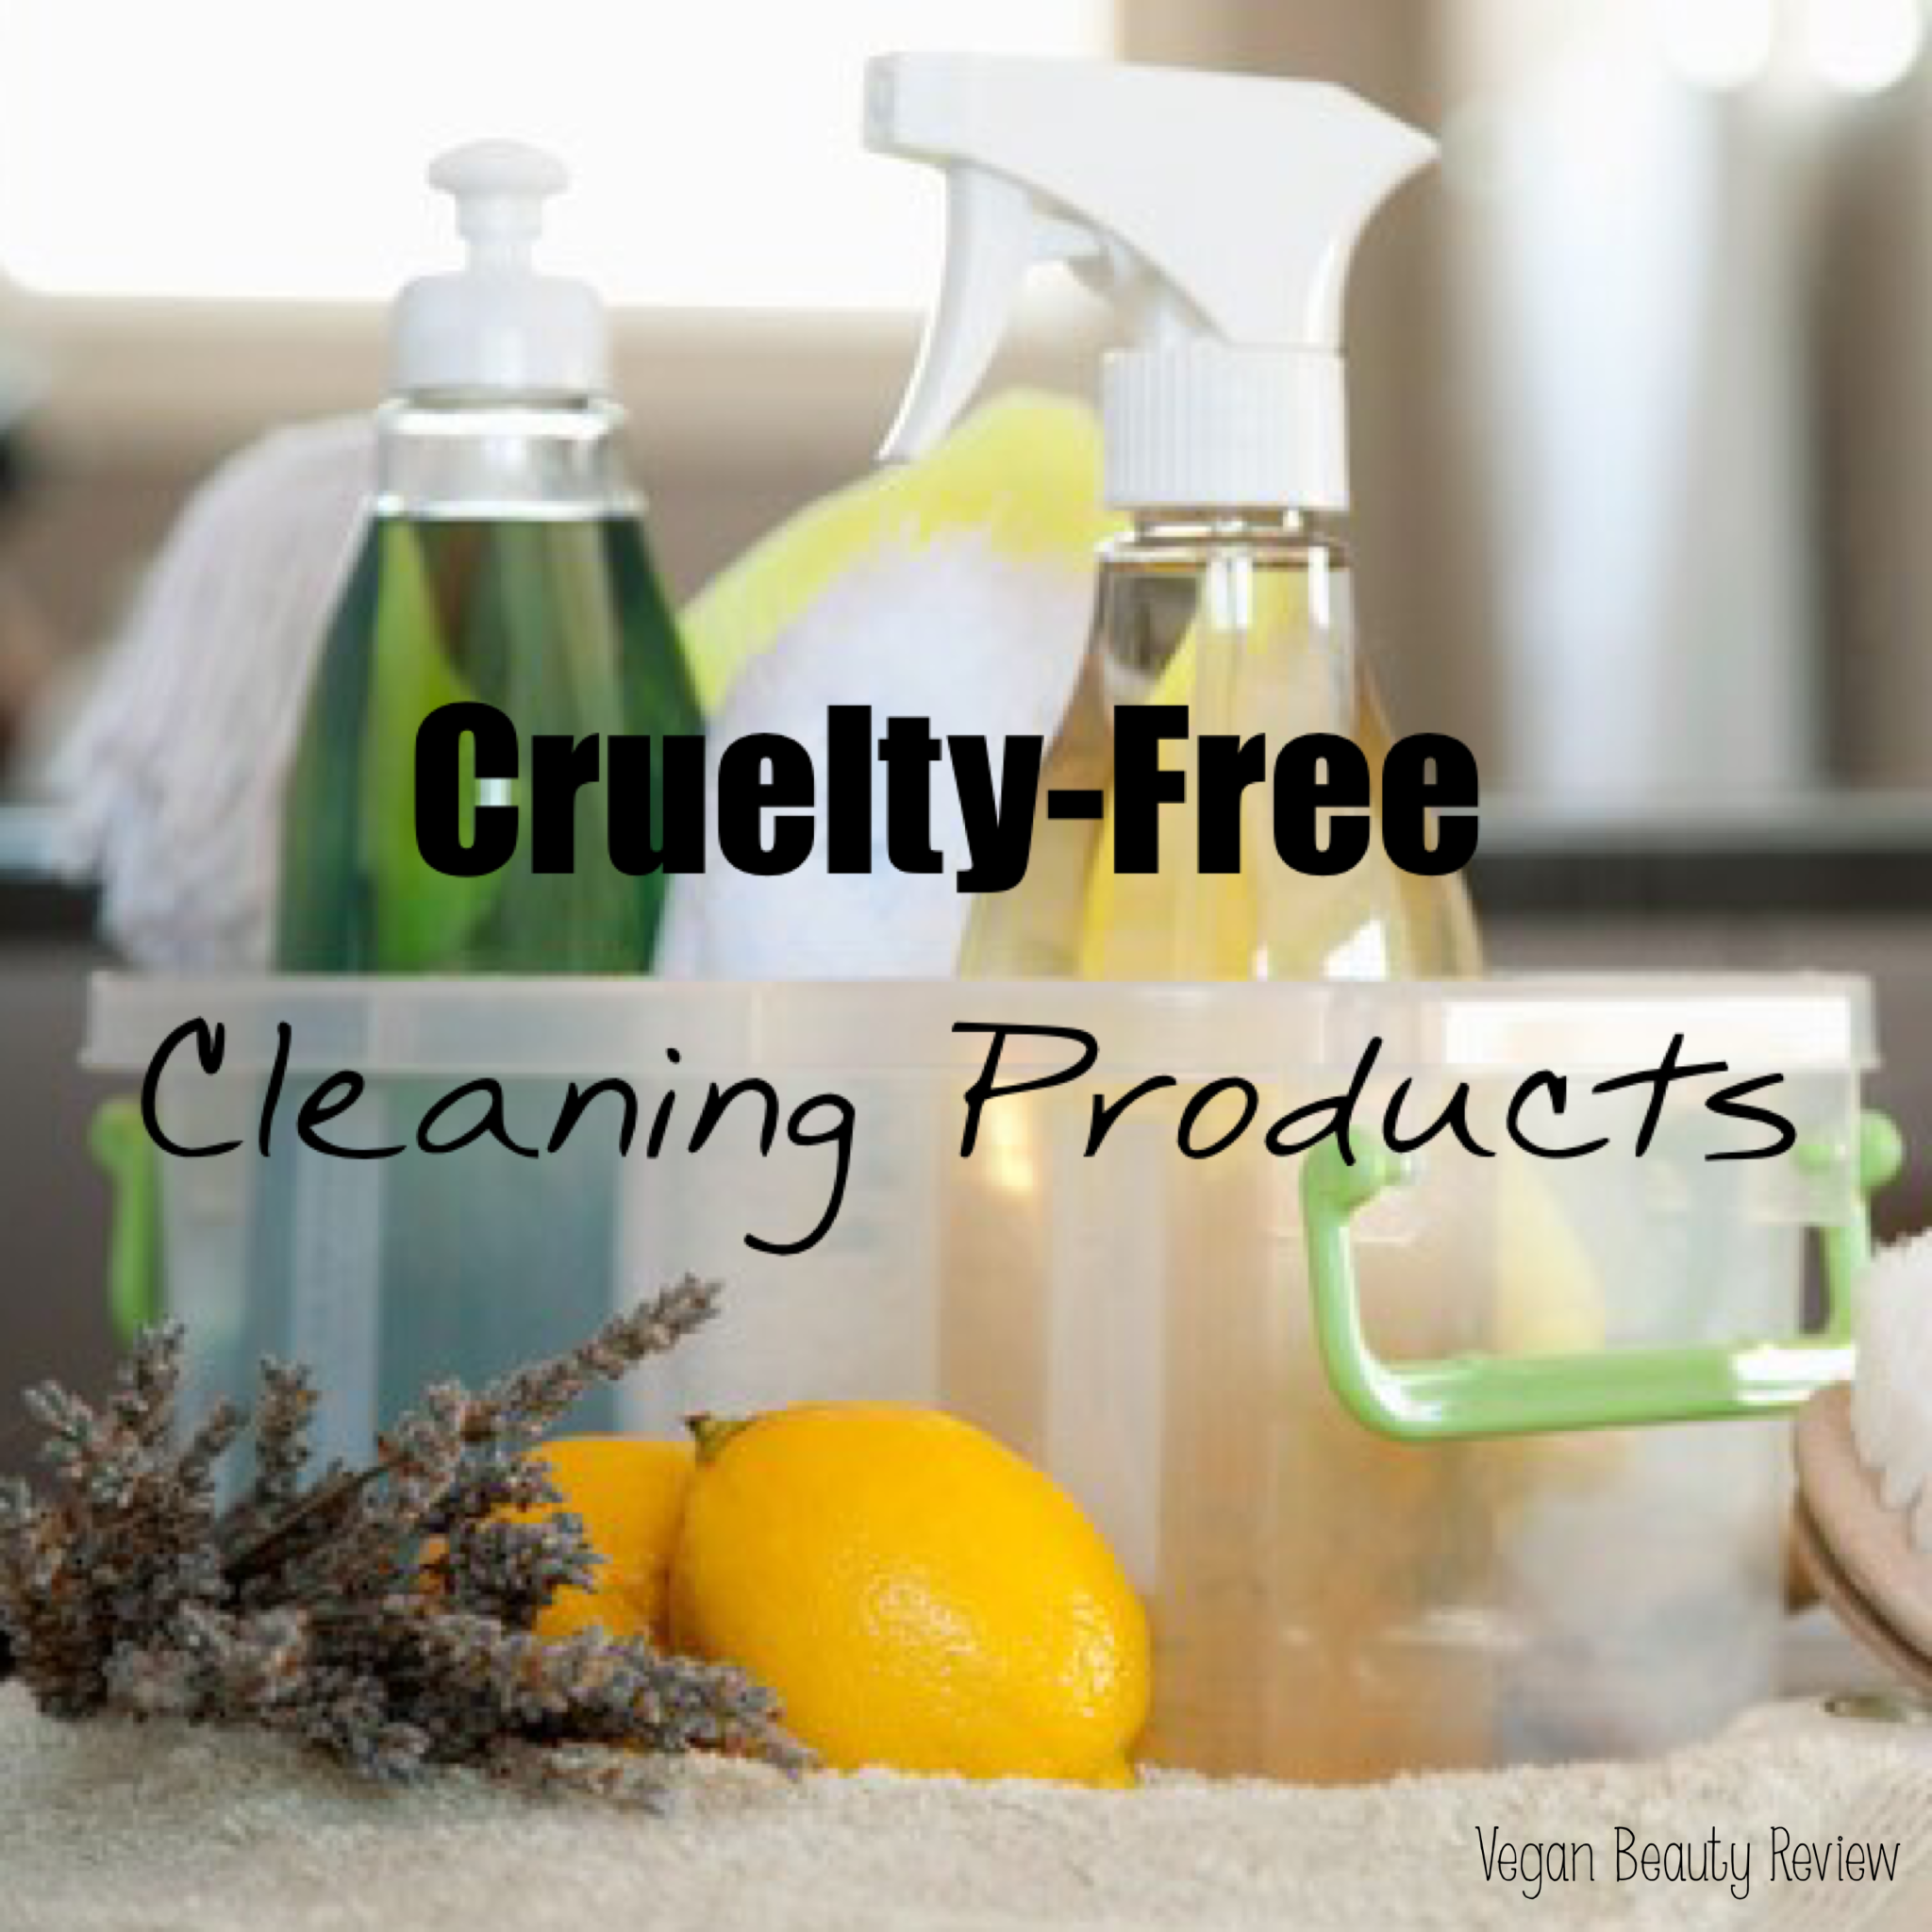 Cruelty-Free Household Cleaning Products - Vegan Beauty Review | Vegan and  Cruelty-Free Beauty, Fashion, Food, and Lifestyle : Vegan Beauty Review |  Vegan and Cruelty-Free Beauty, Fashion, Food, and Lifestyle